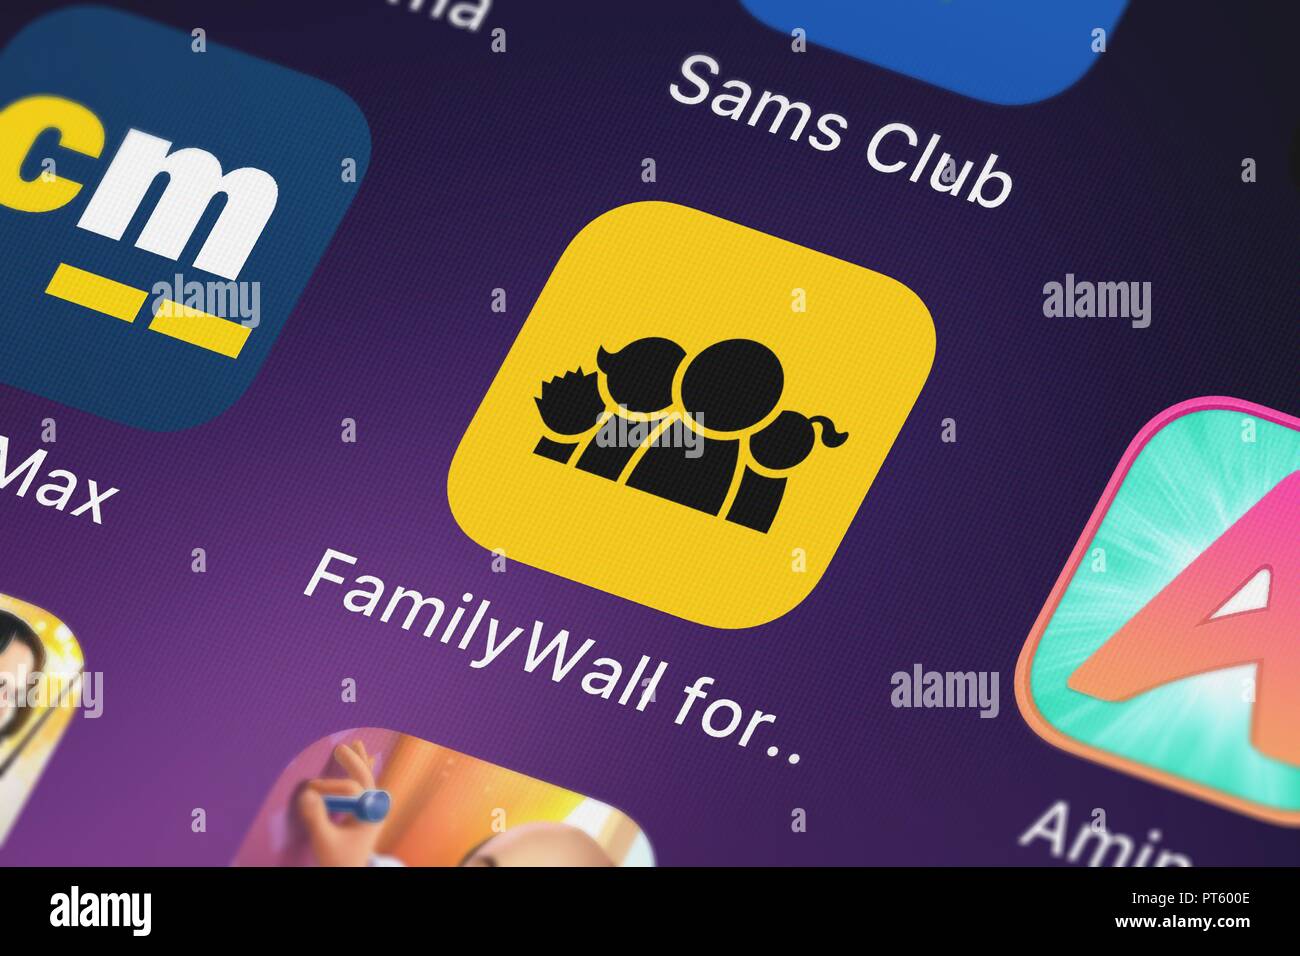 London, United Kingdom - October 06, 2018: Close-up shot of the FamilyWall for Sprint mobile app from Sprint. Stock Photo